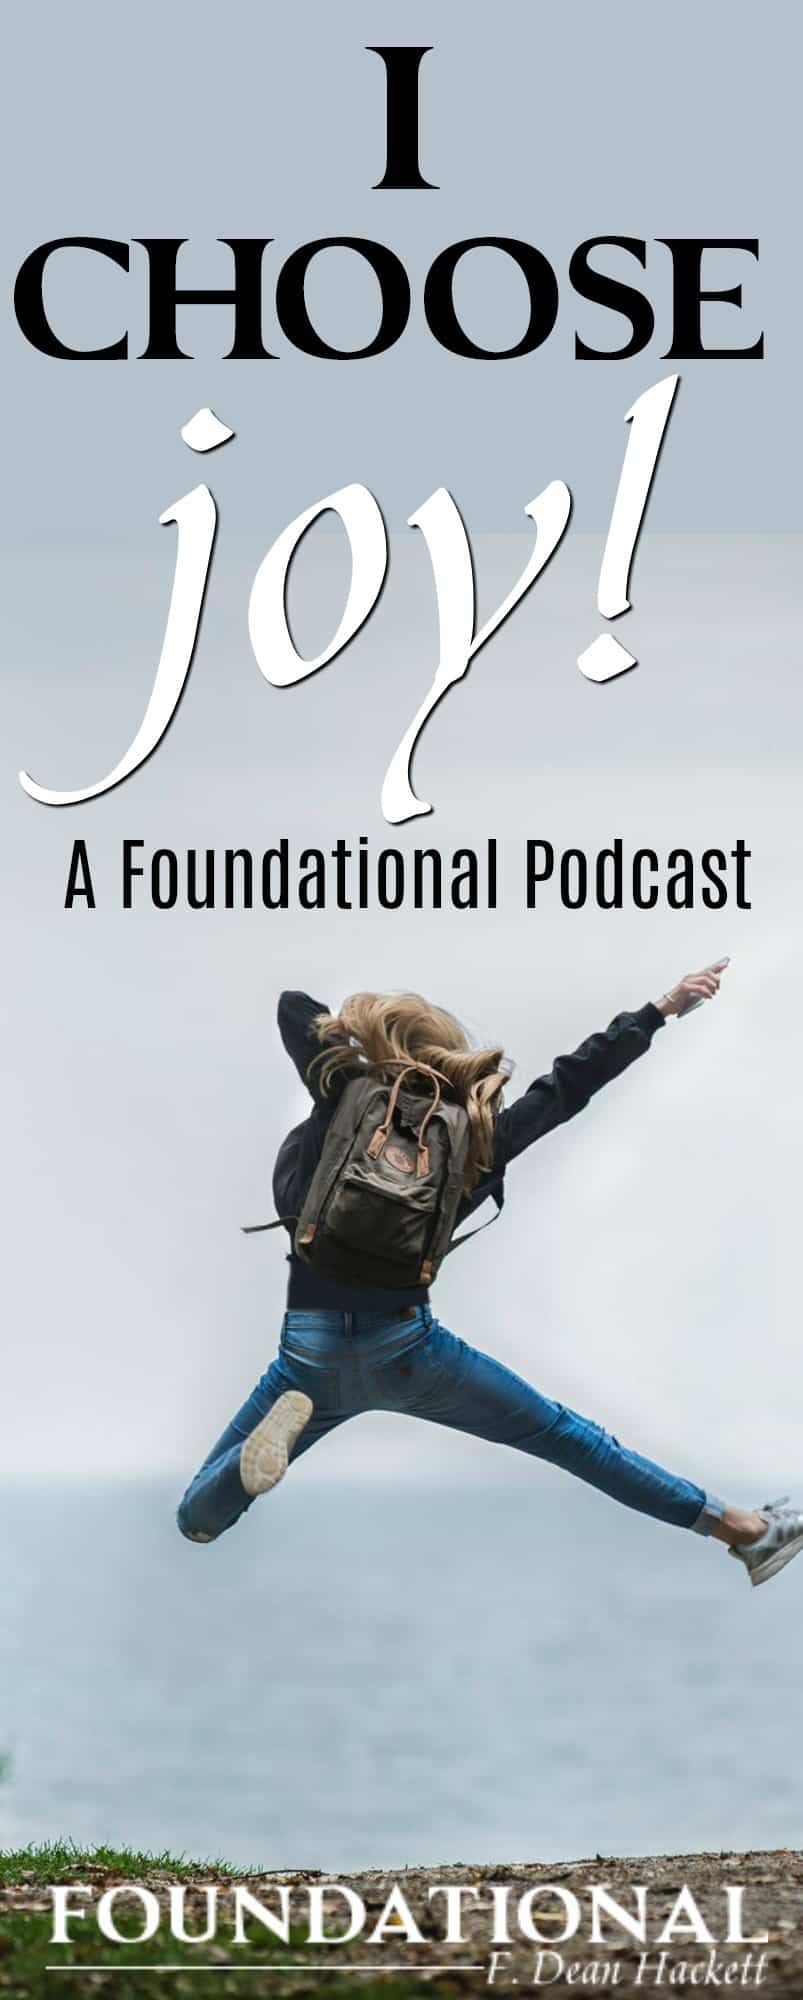 How do you deal with life when bad things happen? We can live a life of joy, even when evil things happen all around us. In this podcast we examine what Scripture teaches us about how to choose joy.